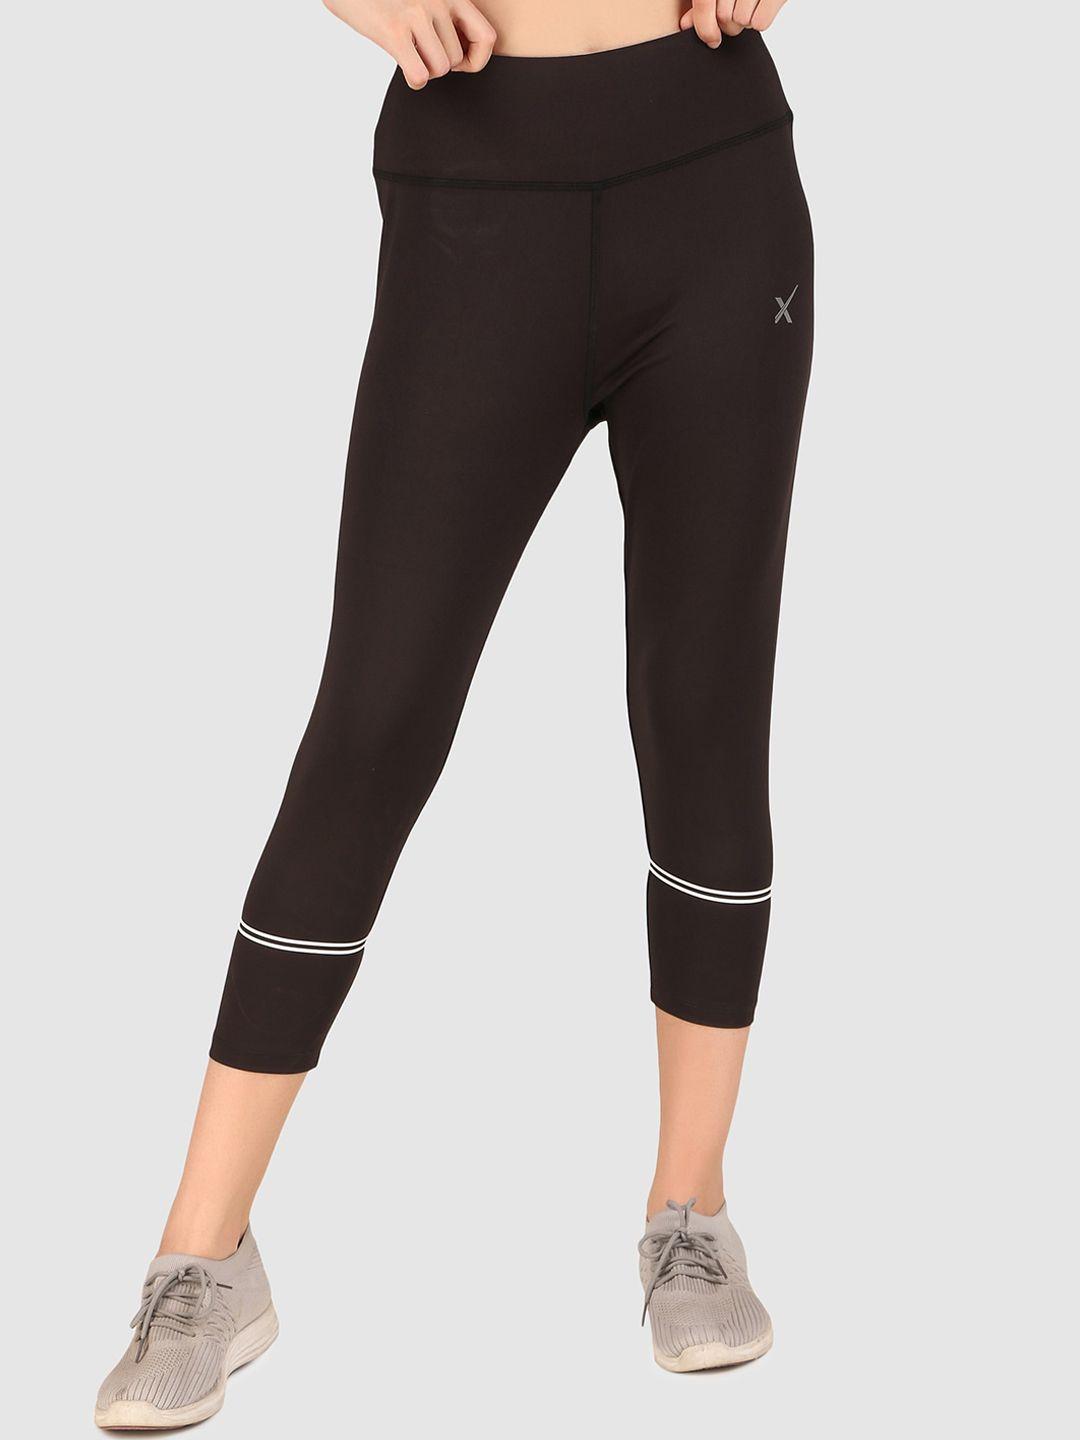 hrx by hrithik roshan coffee brown cropped length training tights